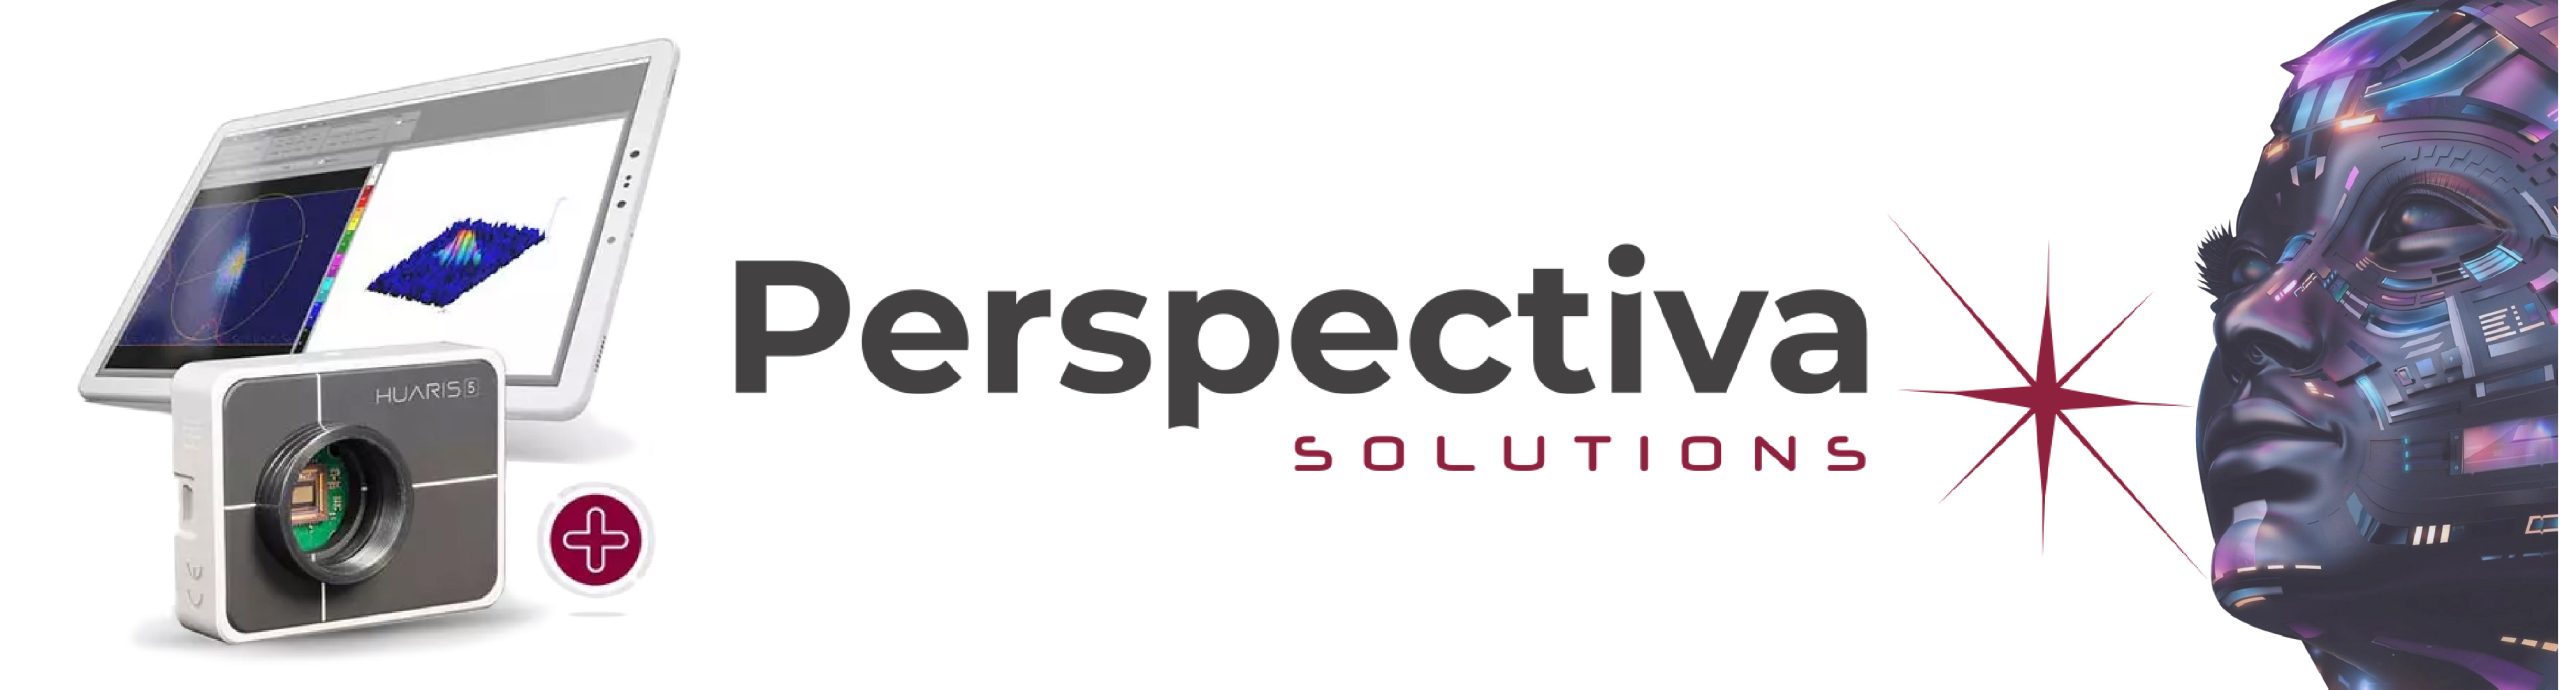 Perspectiva Solutions company logo, laser beam profiler and software and an AI face